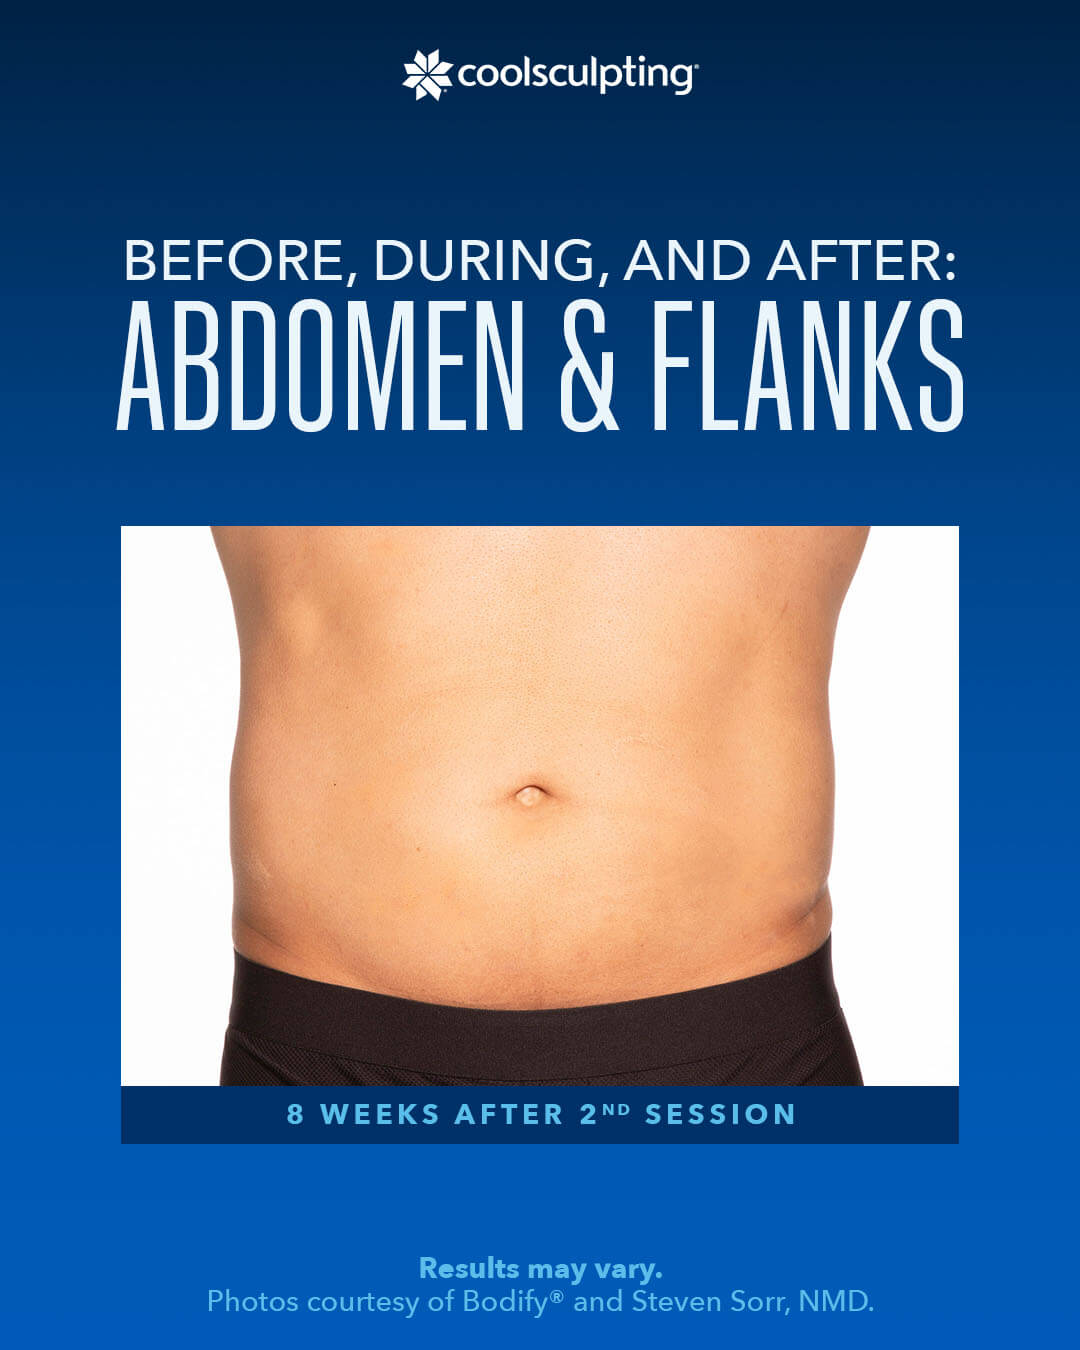 coolsculpting ,Before, During,AND After ABDOMEN $FLANKS